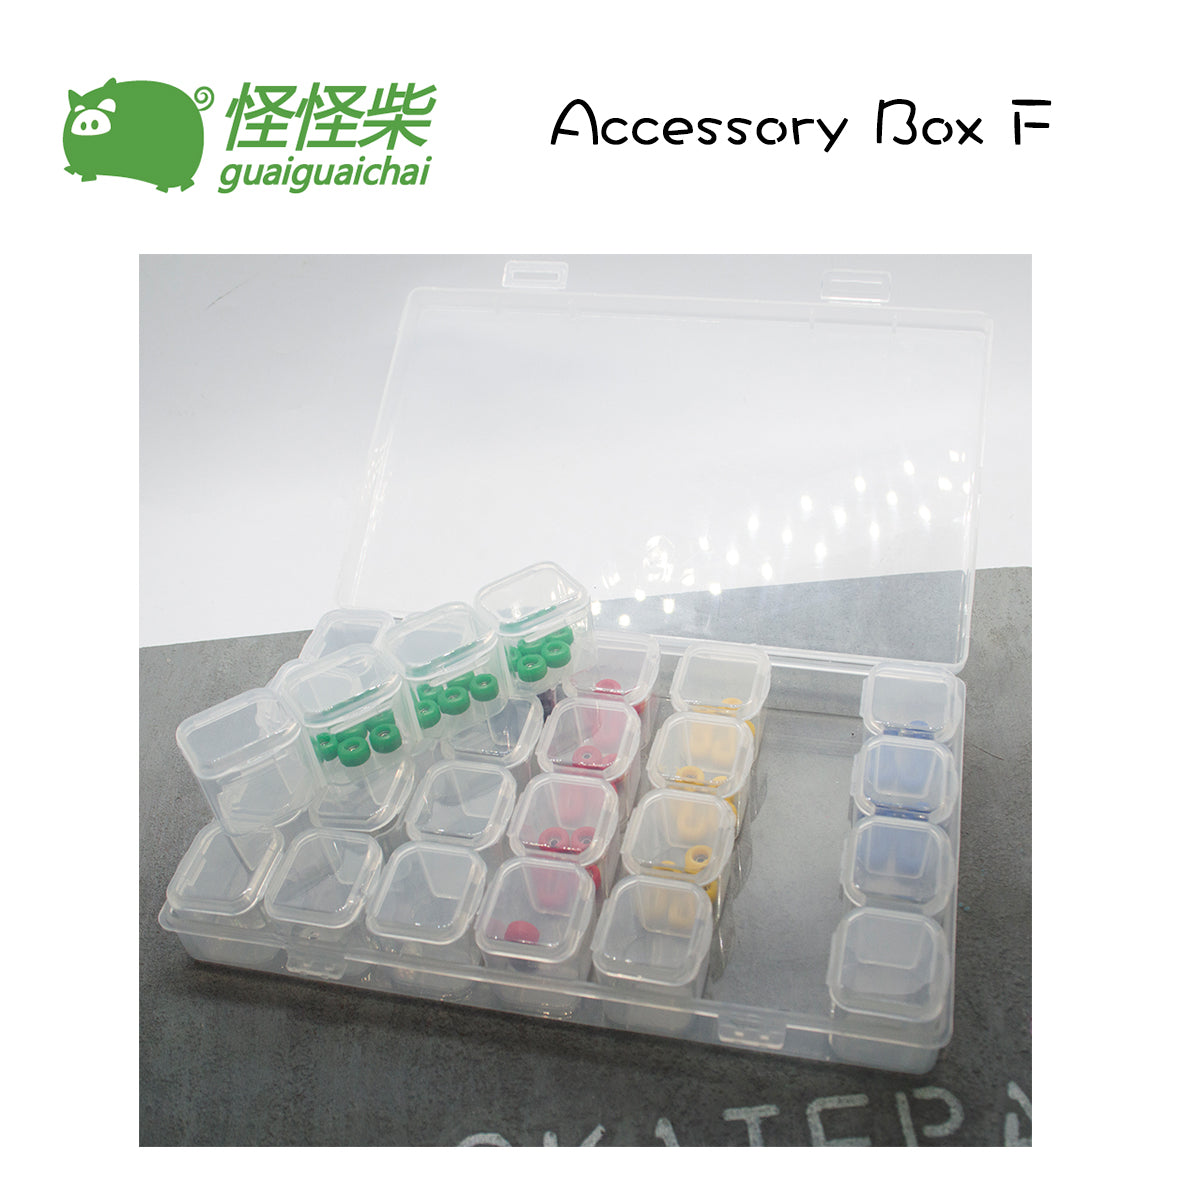 Fingerboard Accessory Boxes